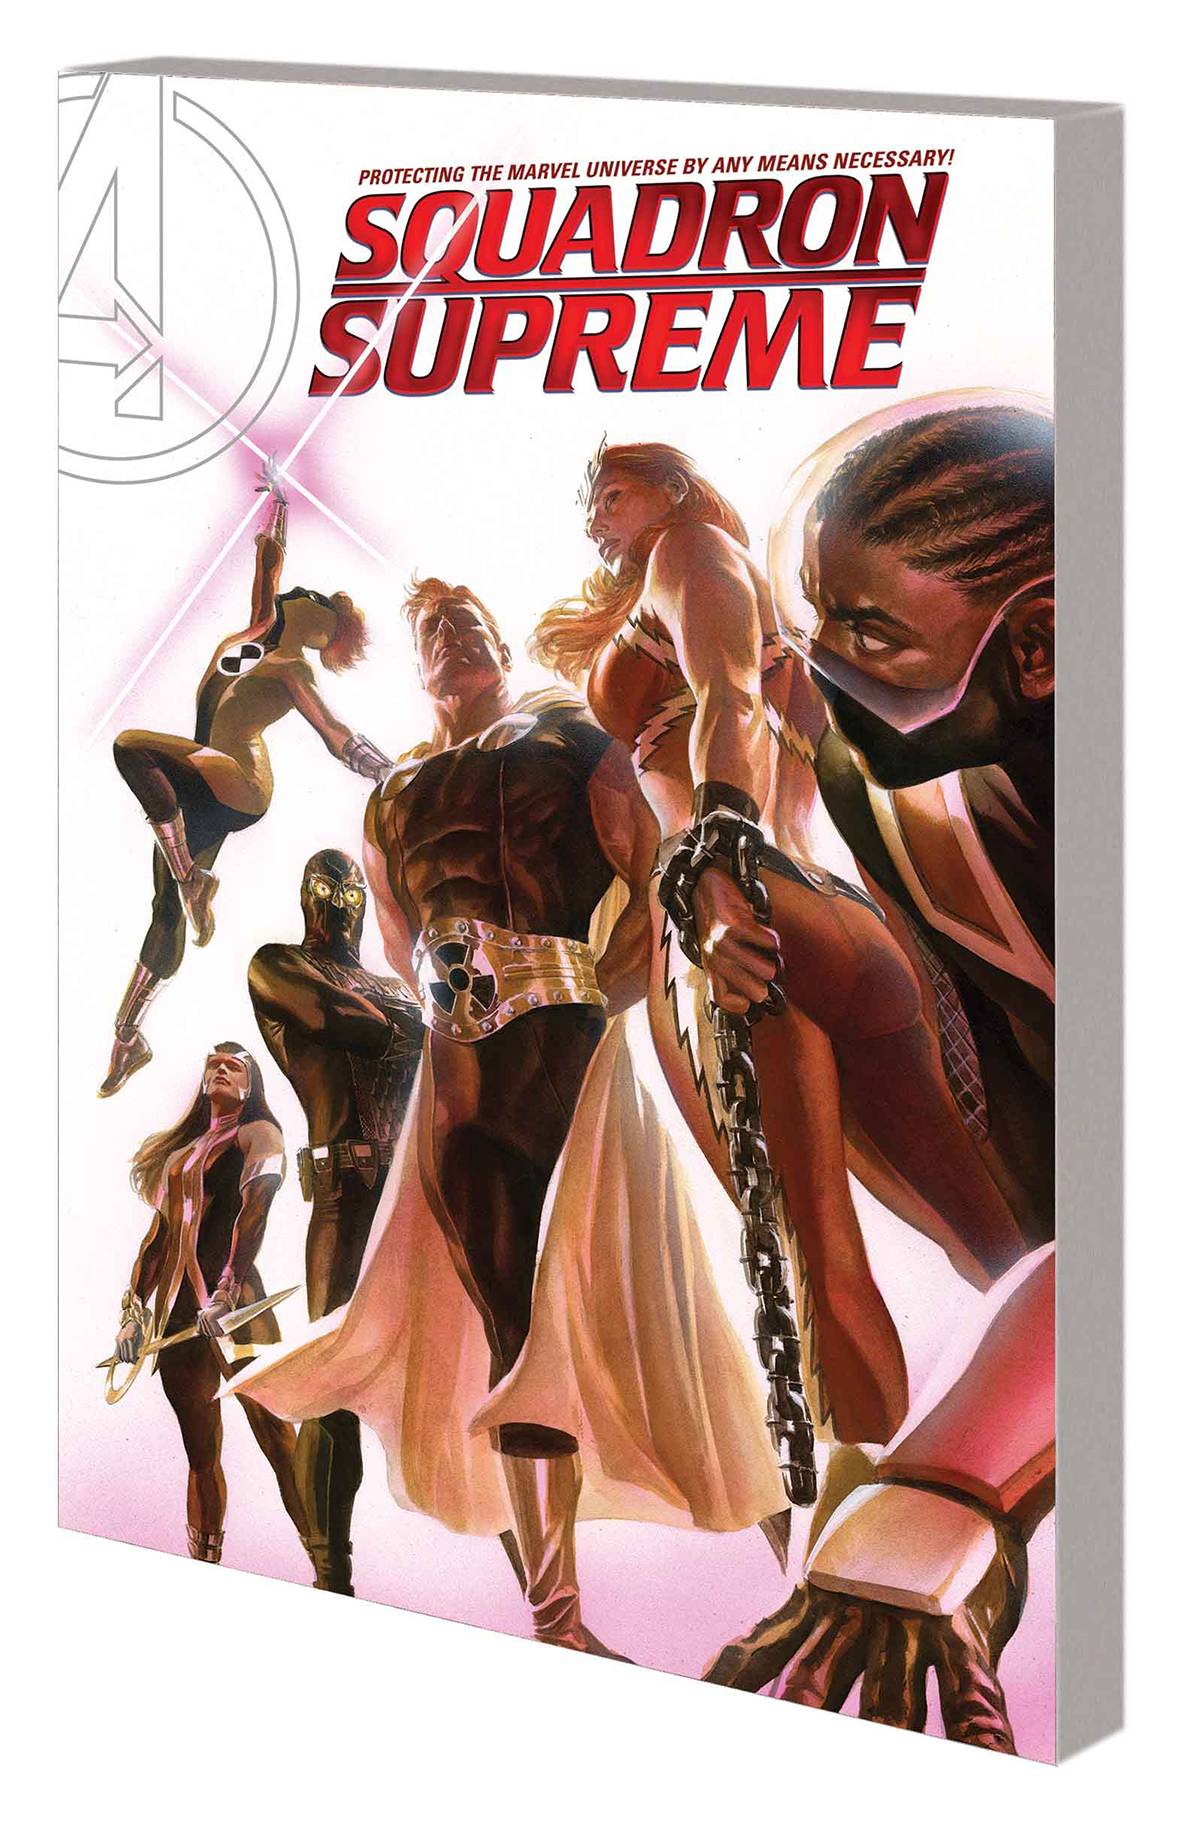 SQUADRON SUPREME TP VOL 01 BY ANY MEANS NECESSARY